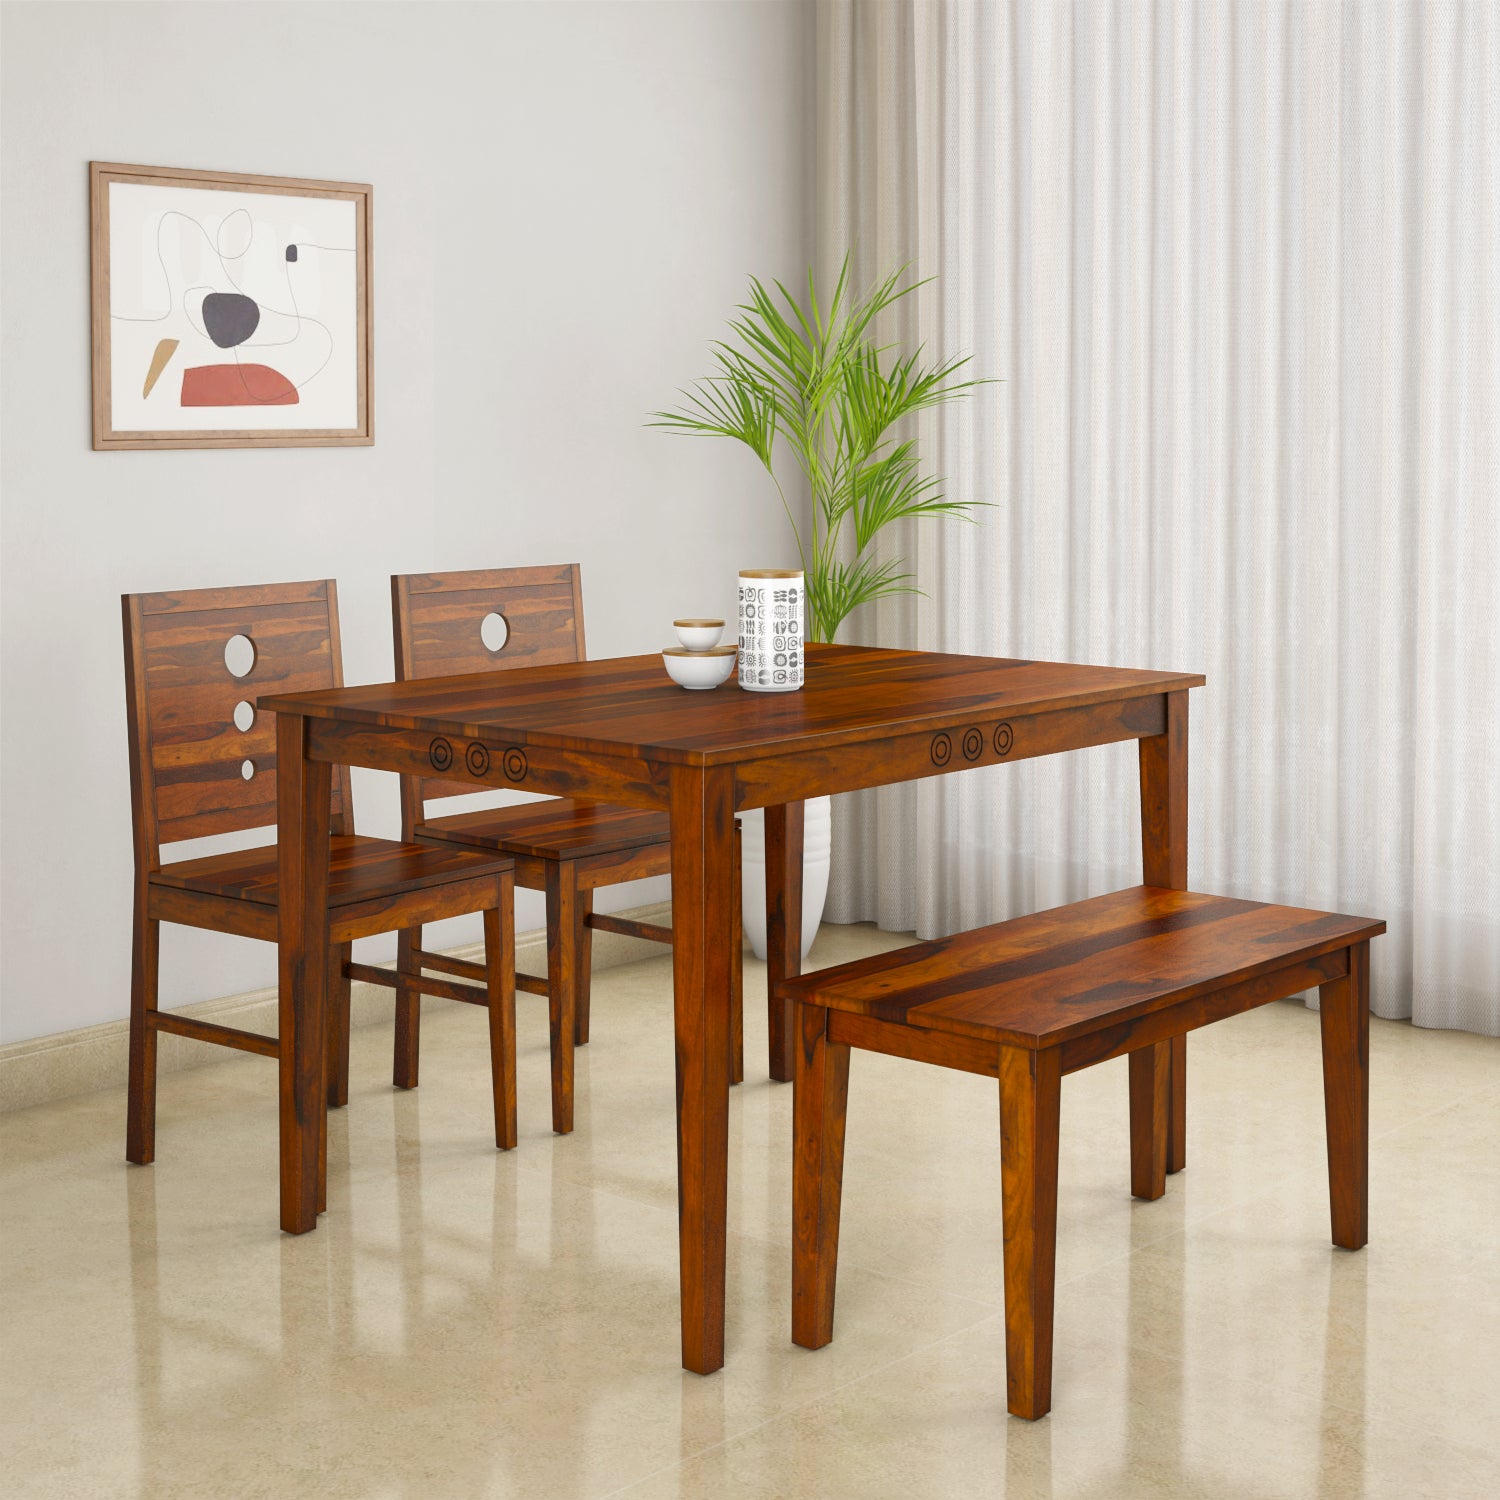 Target 4 Seater Dining Set With Bench (Walnut)